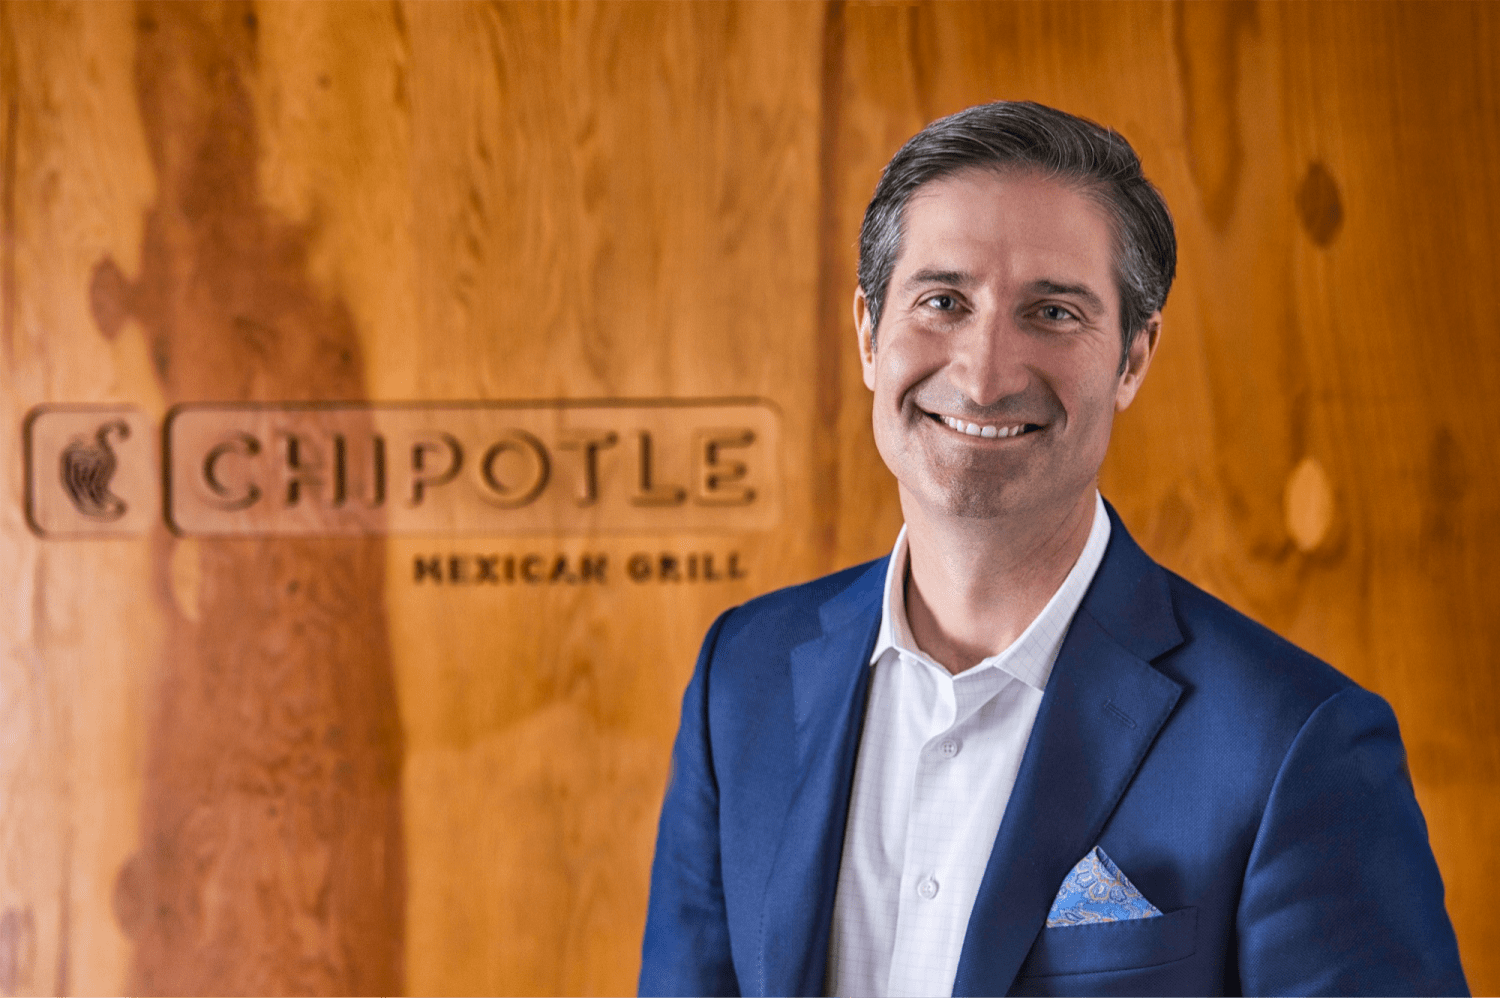 Free On-Demand Webinar: How Chipotle Connects Corporate Growth with Social Responsibility